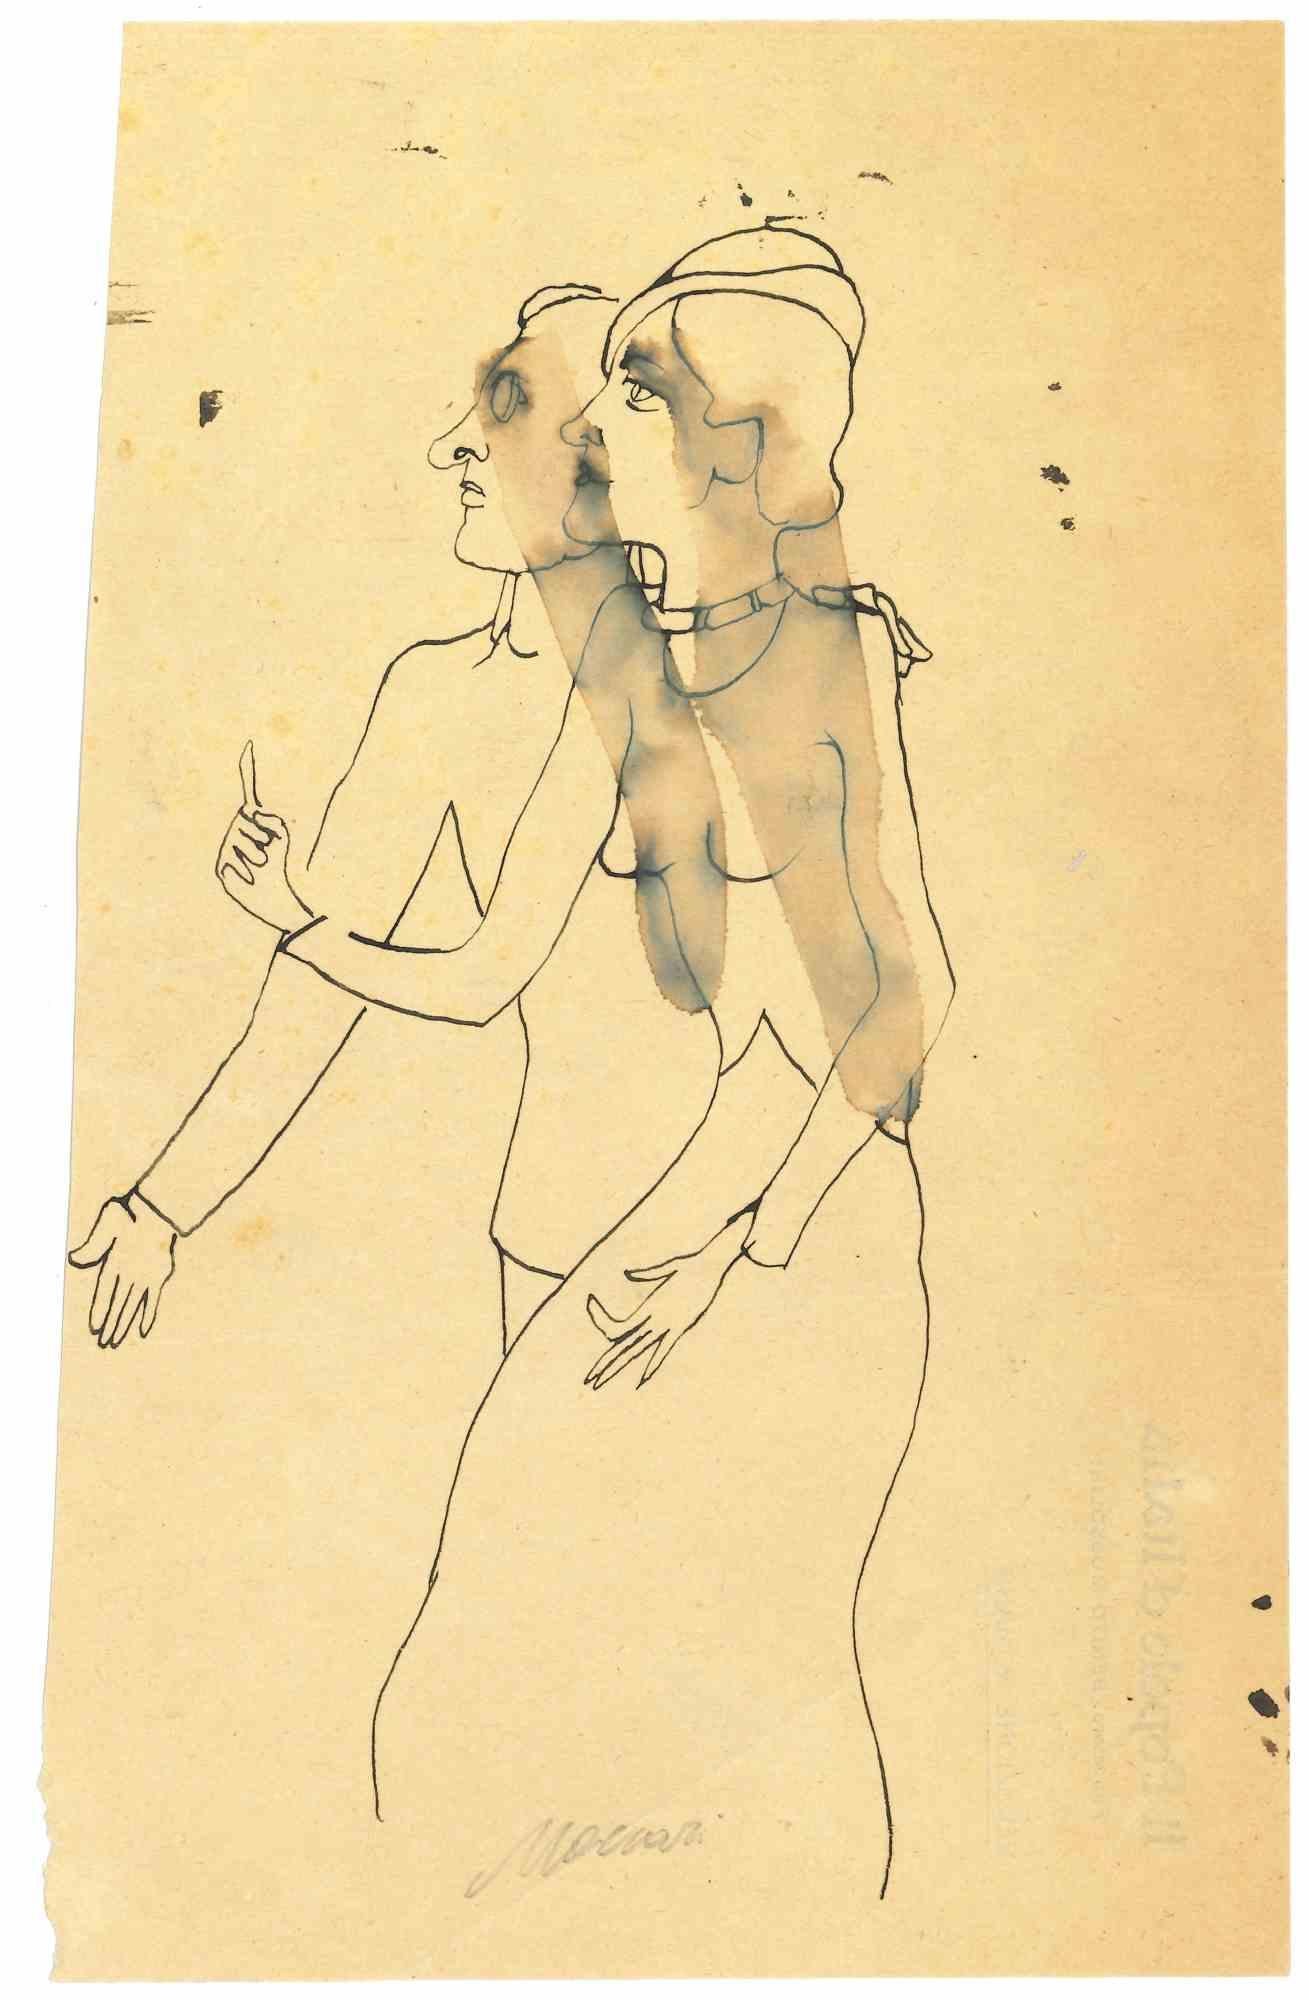 The Couple - Drawing by Mino Maccari - 1950s